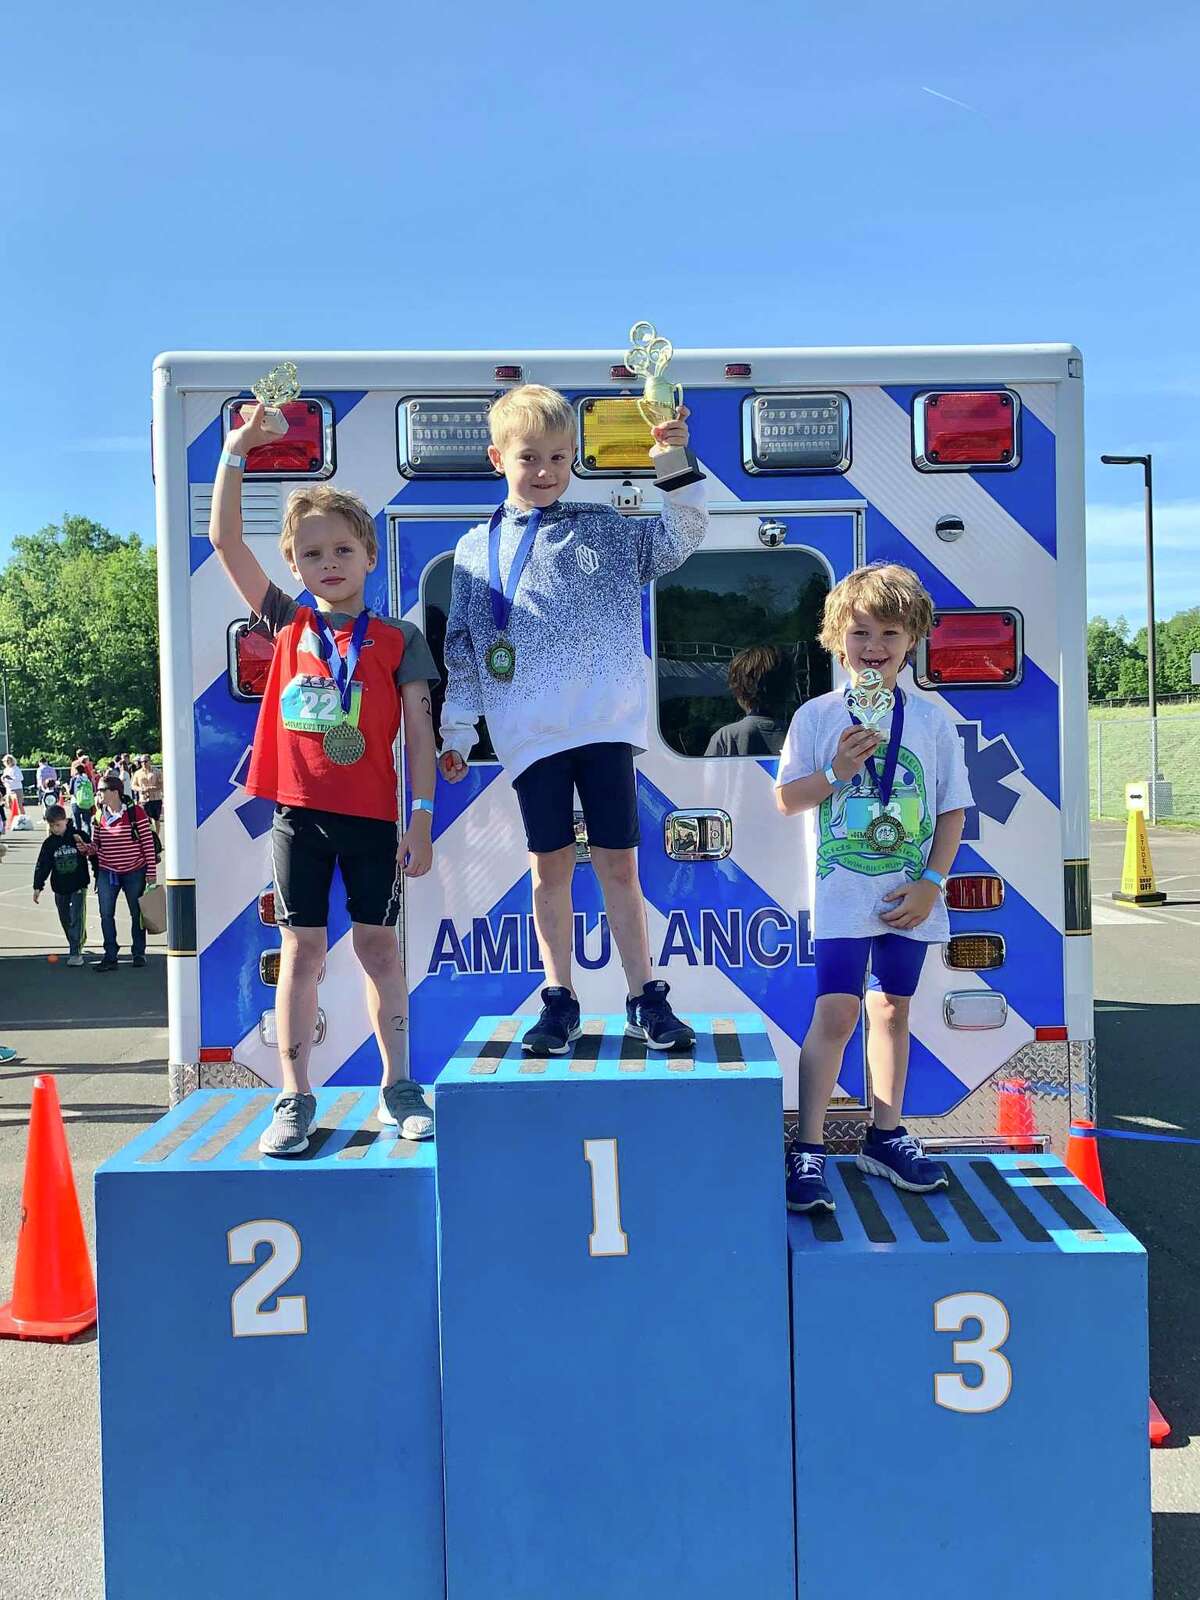 After a successful 2019 event, the COVID-19 pandemic got in the way for the next two years. But the GEMS Kids Triathlon is scheduled to return on June 12 and registration is open. The event is open for kids ages 6 to 14, and winners will be crowned in the three-event competition.